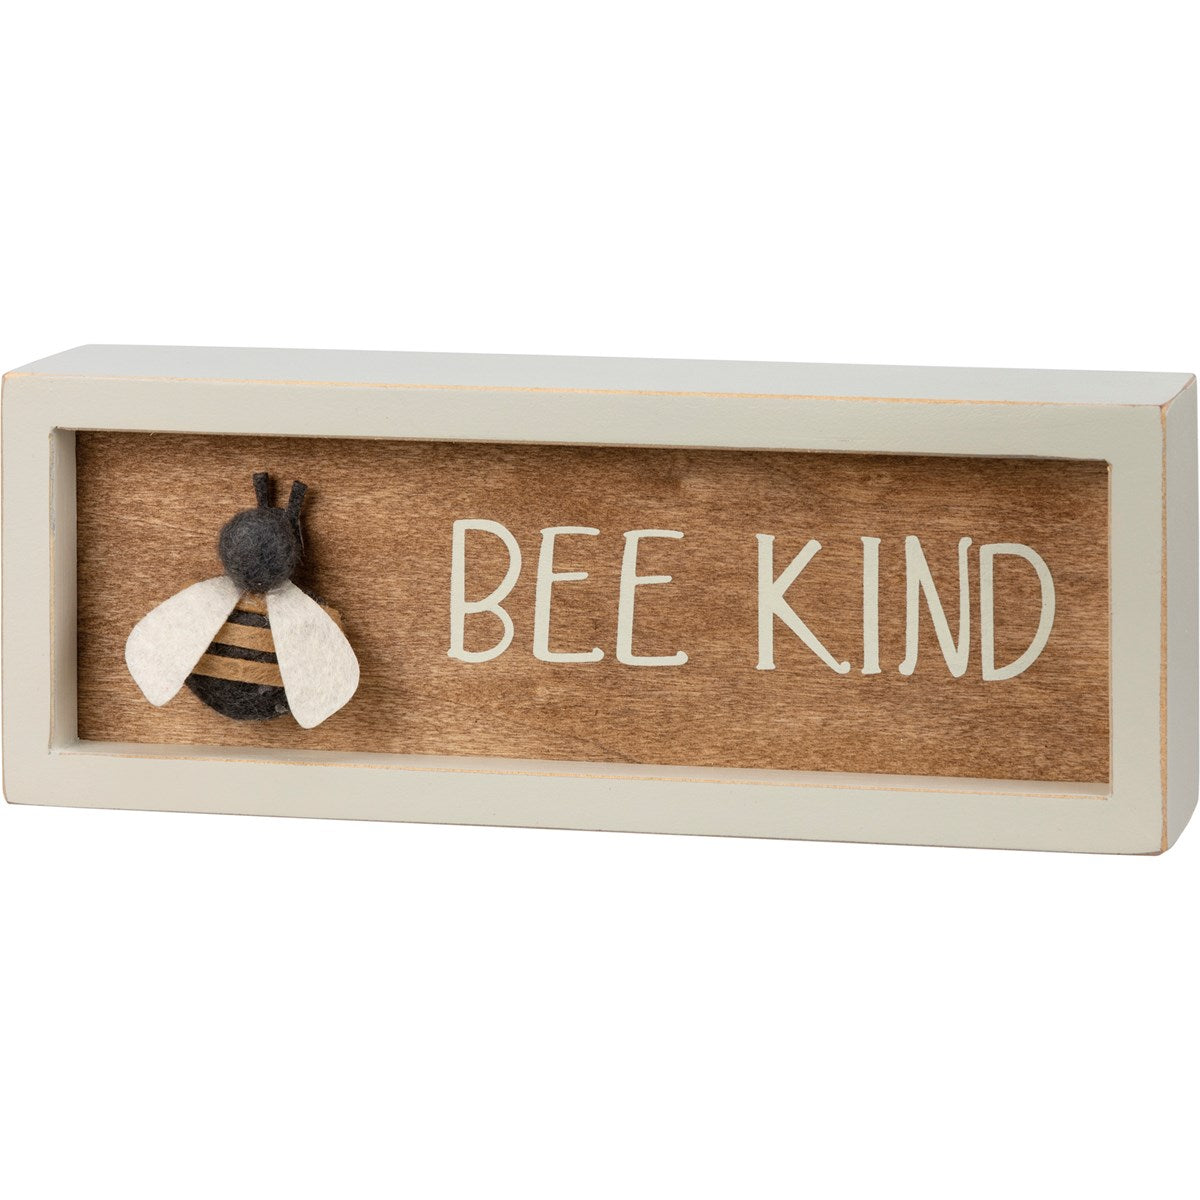 Primitives By Kathy Inset Box Sign - Bee Kind-Primitives by Kathy-Little Giant Kidz